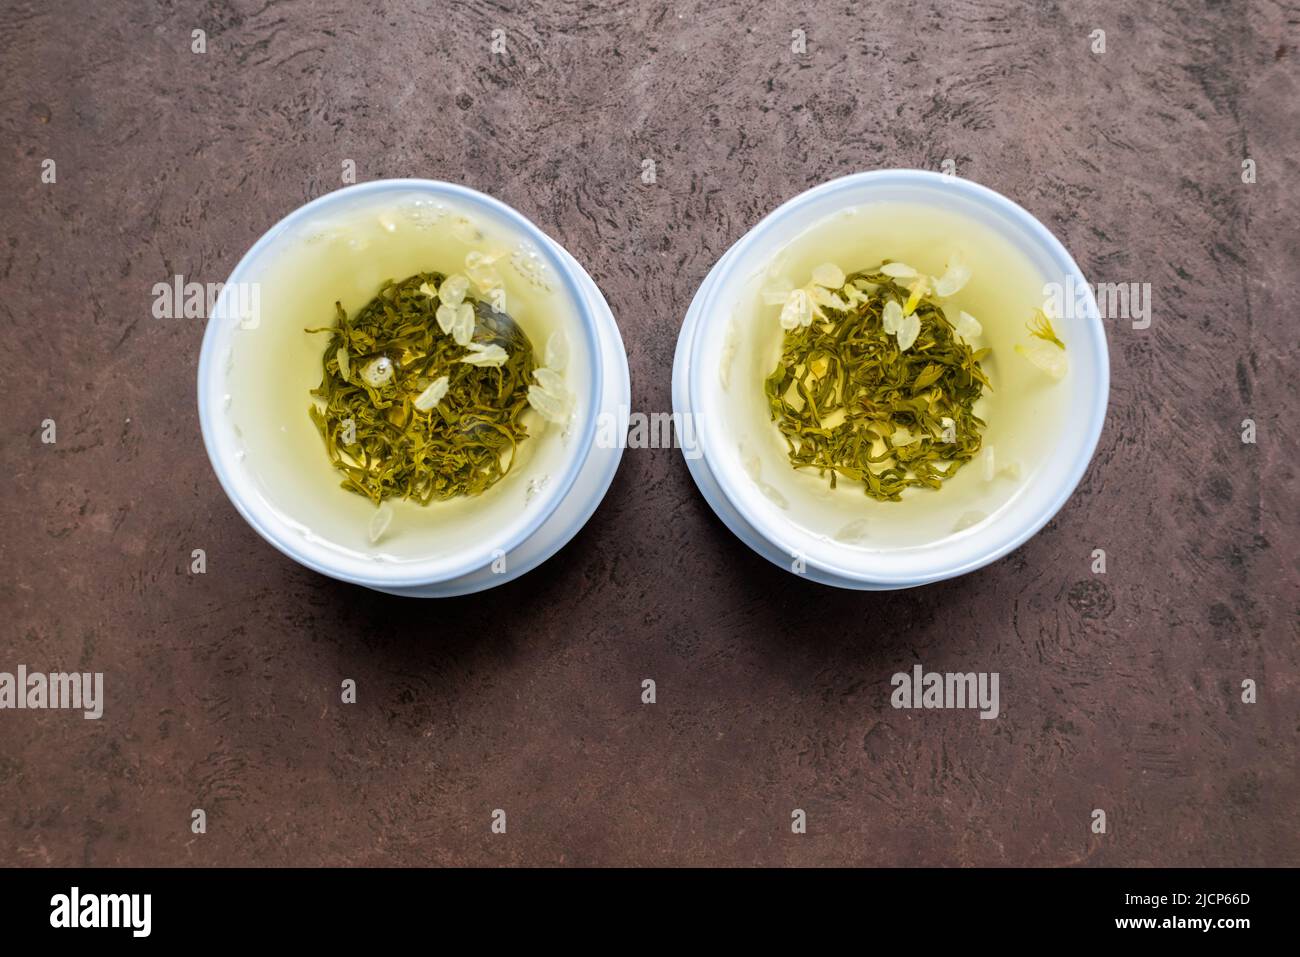 Two cups of green tea on a stone table close-up view Stock Photo